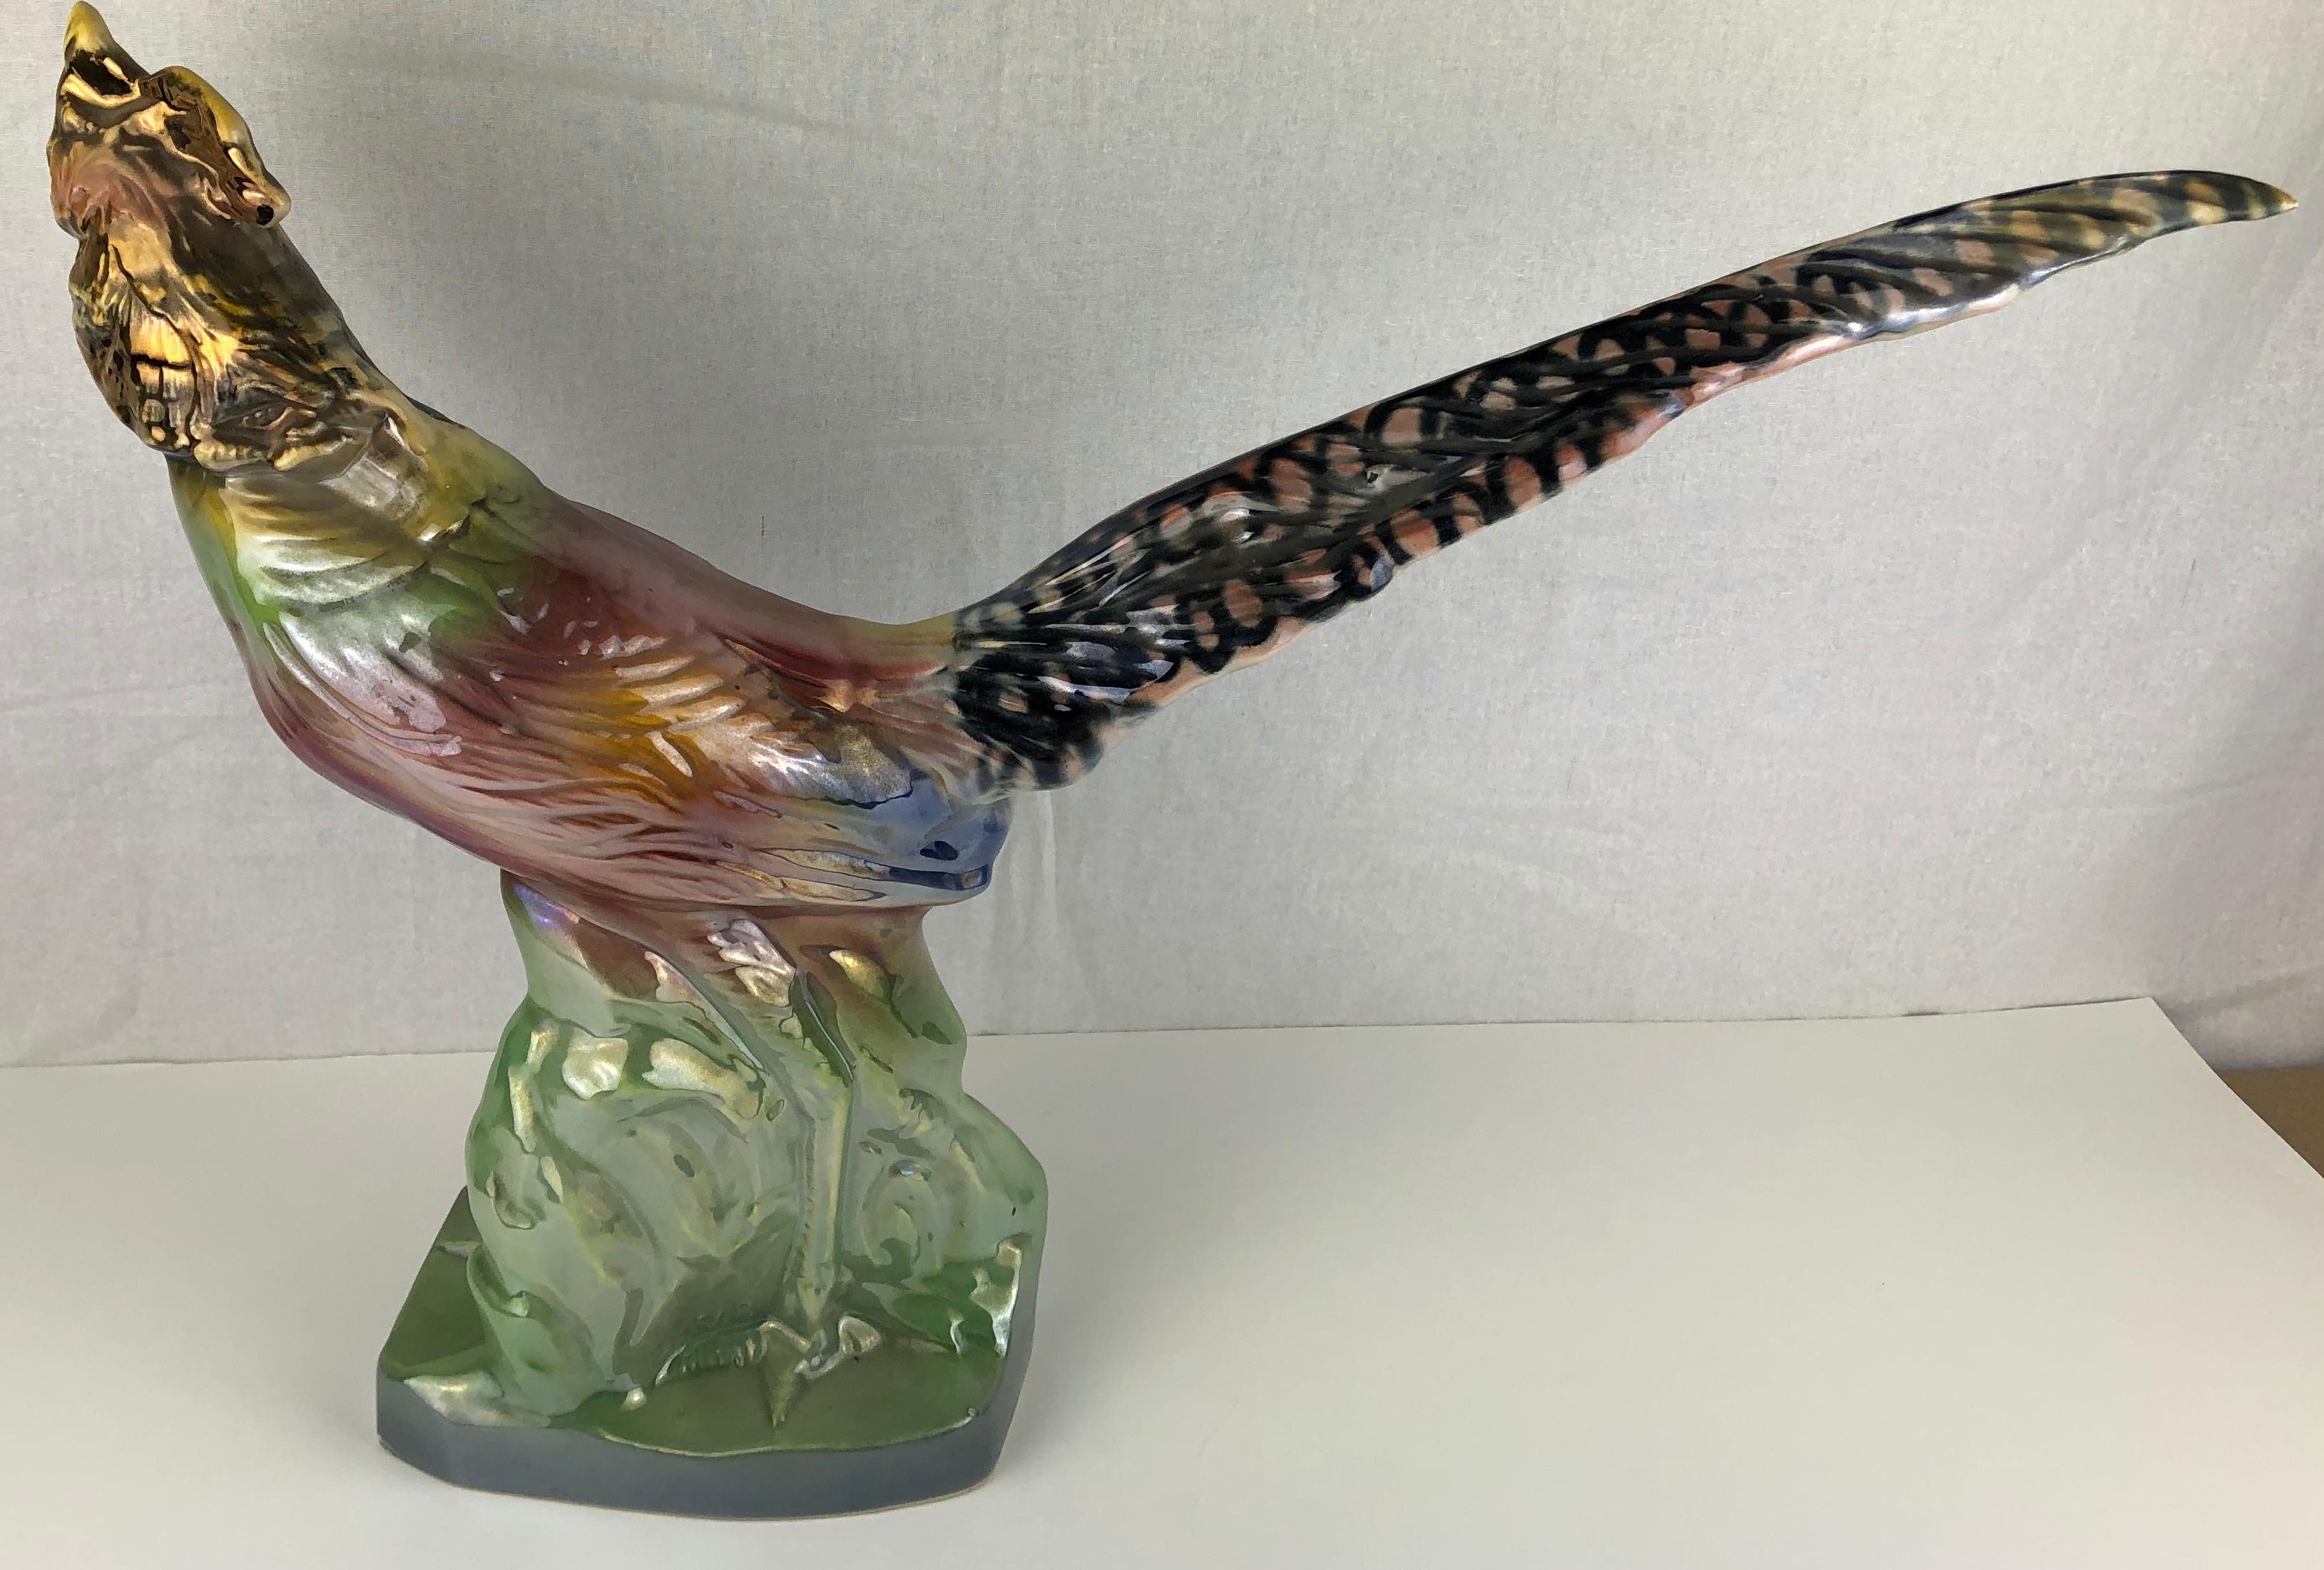 Porcelain Early 20th Century Sculpted Ceramic Pheasant Bird Figure from H. Bequet